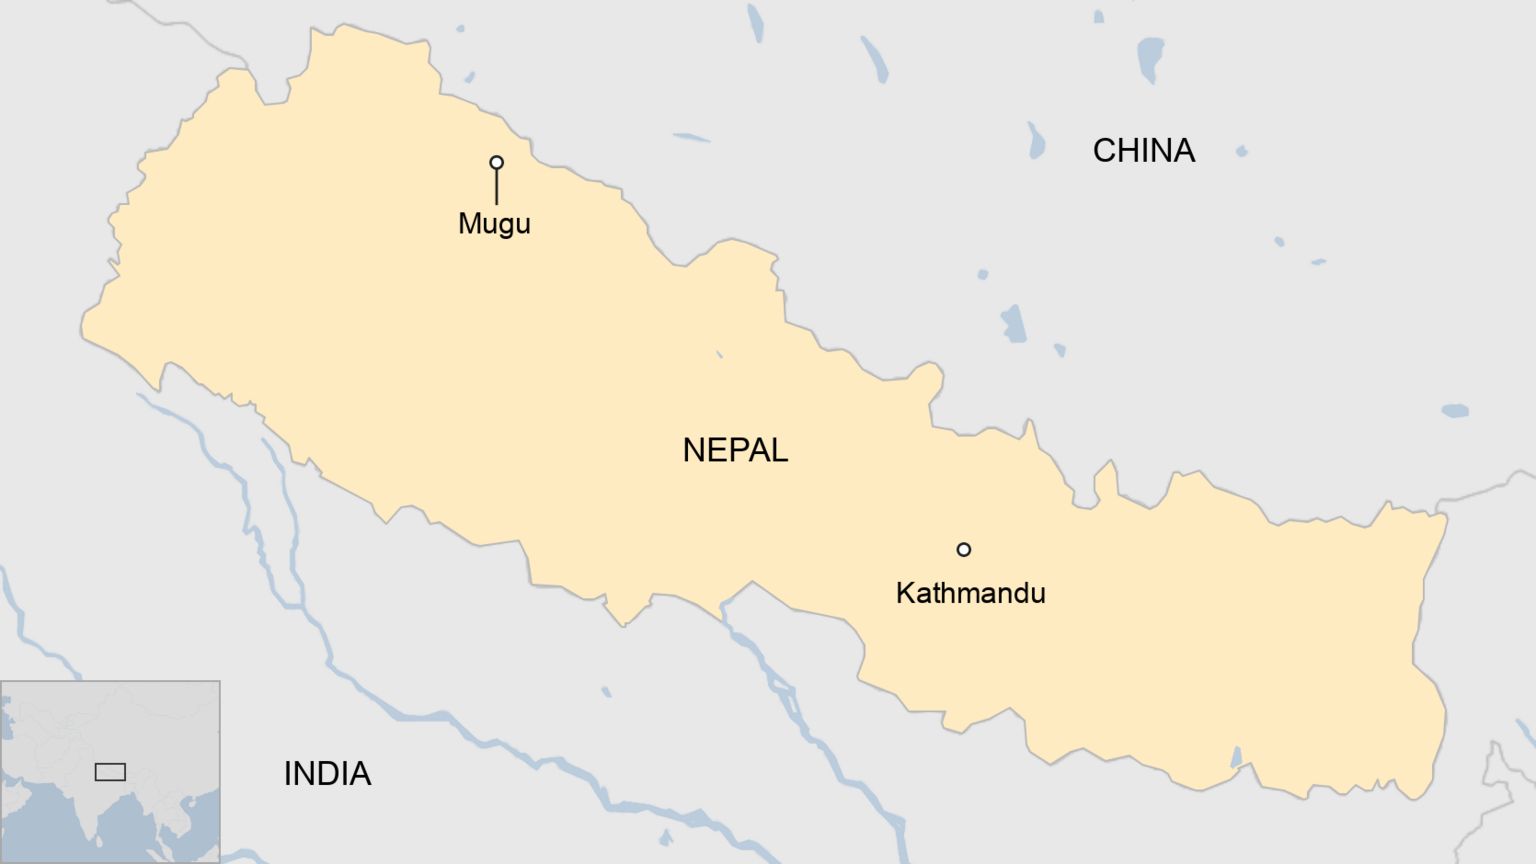 Map showing the district of Mugu in Nepal